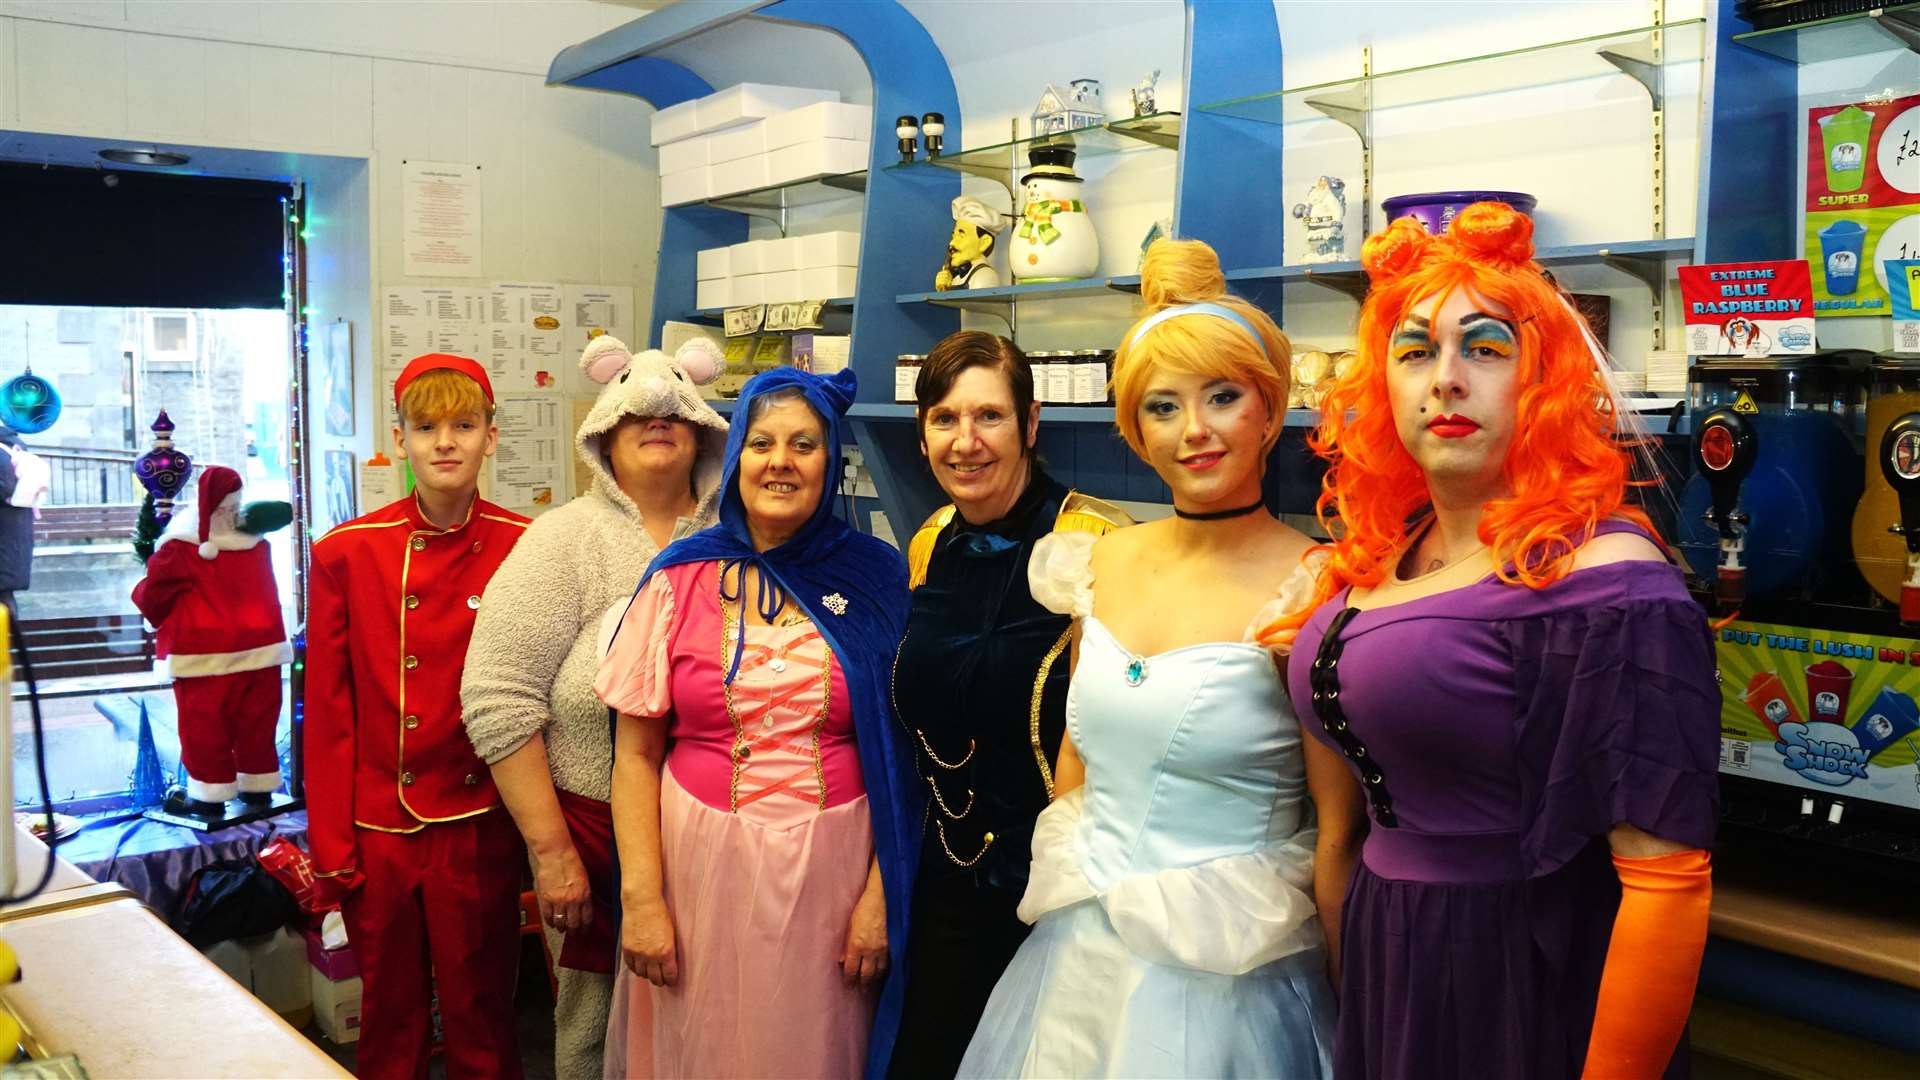 This colourful crew are the staff at Jamieson's Bakery who dressed up as Cinderella panto characters and won Best Fancy Dress award. Picture: DGS